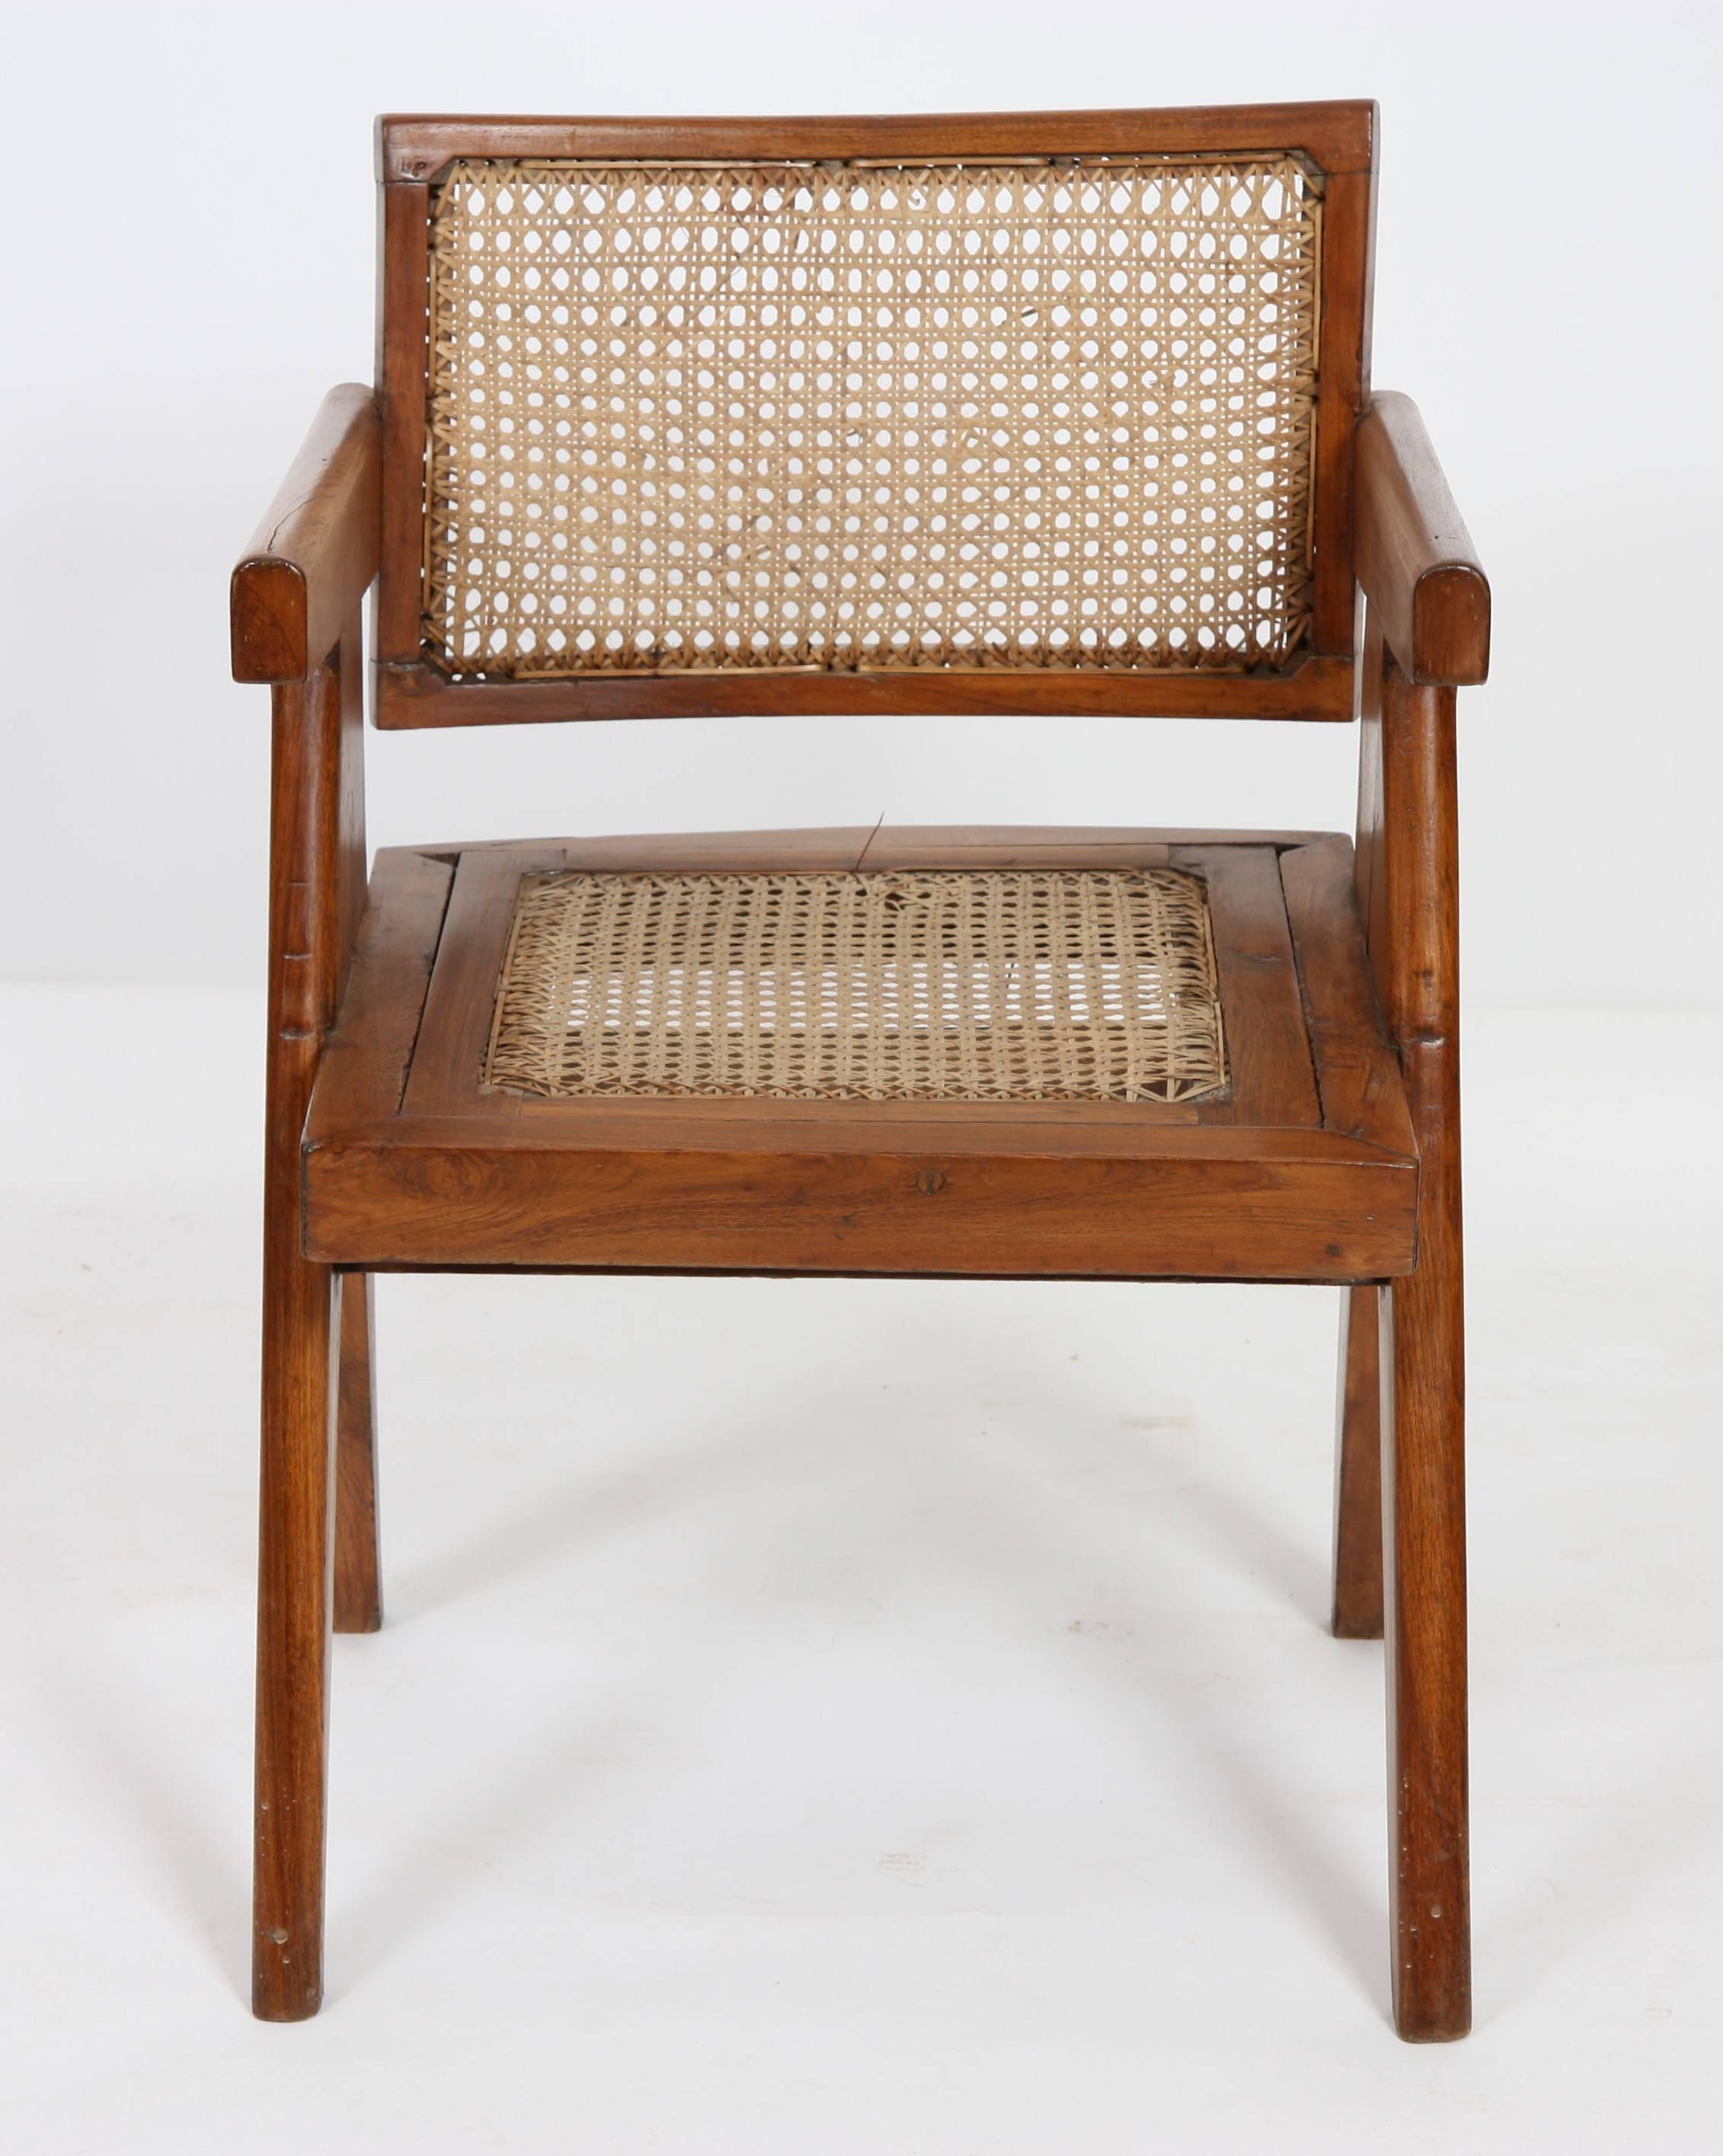 Pierre Jeanneret (1896-1967) "office cane elegant chairs".
In teak with inclined and slightly curved backrest.
Detached armrests and side
compass design armrests. Cane seat and backrest,
circa 1956.
Measures: Height 75 cm x length 52